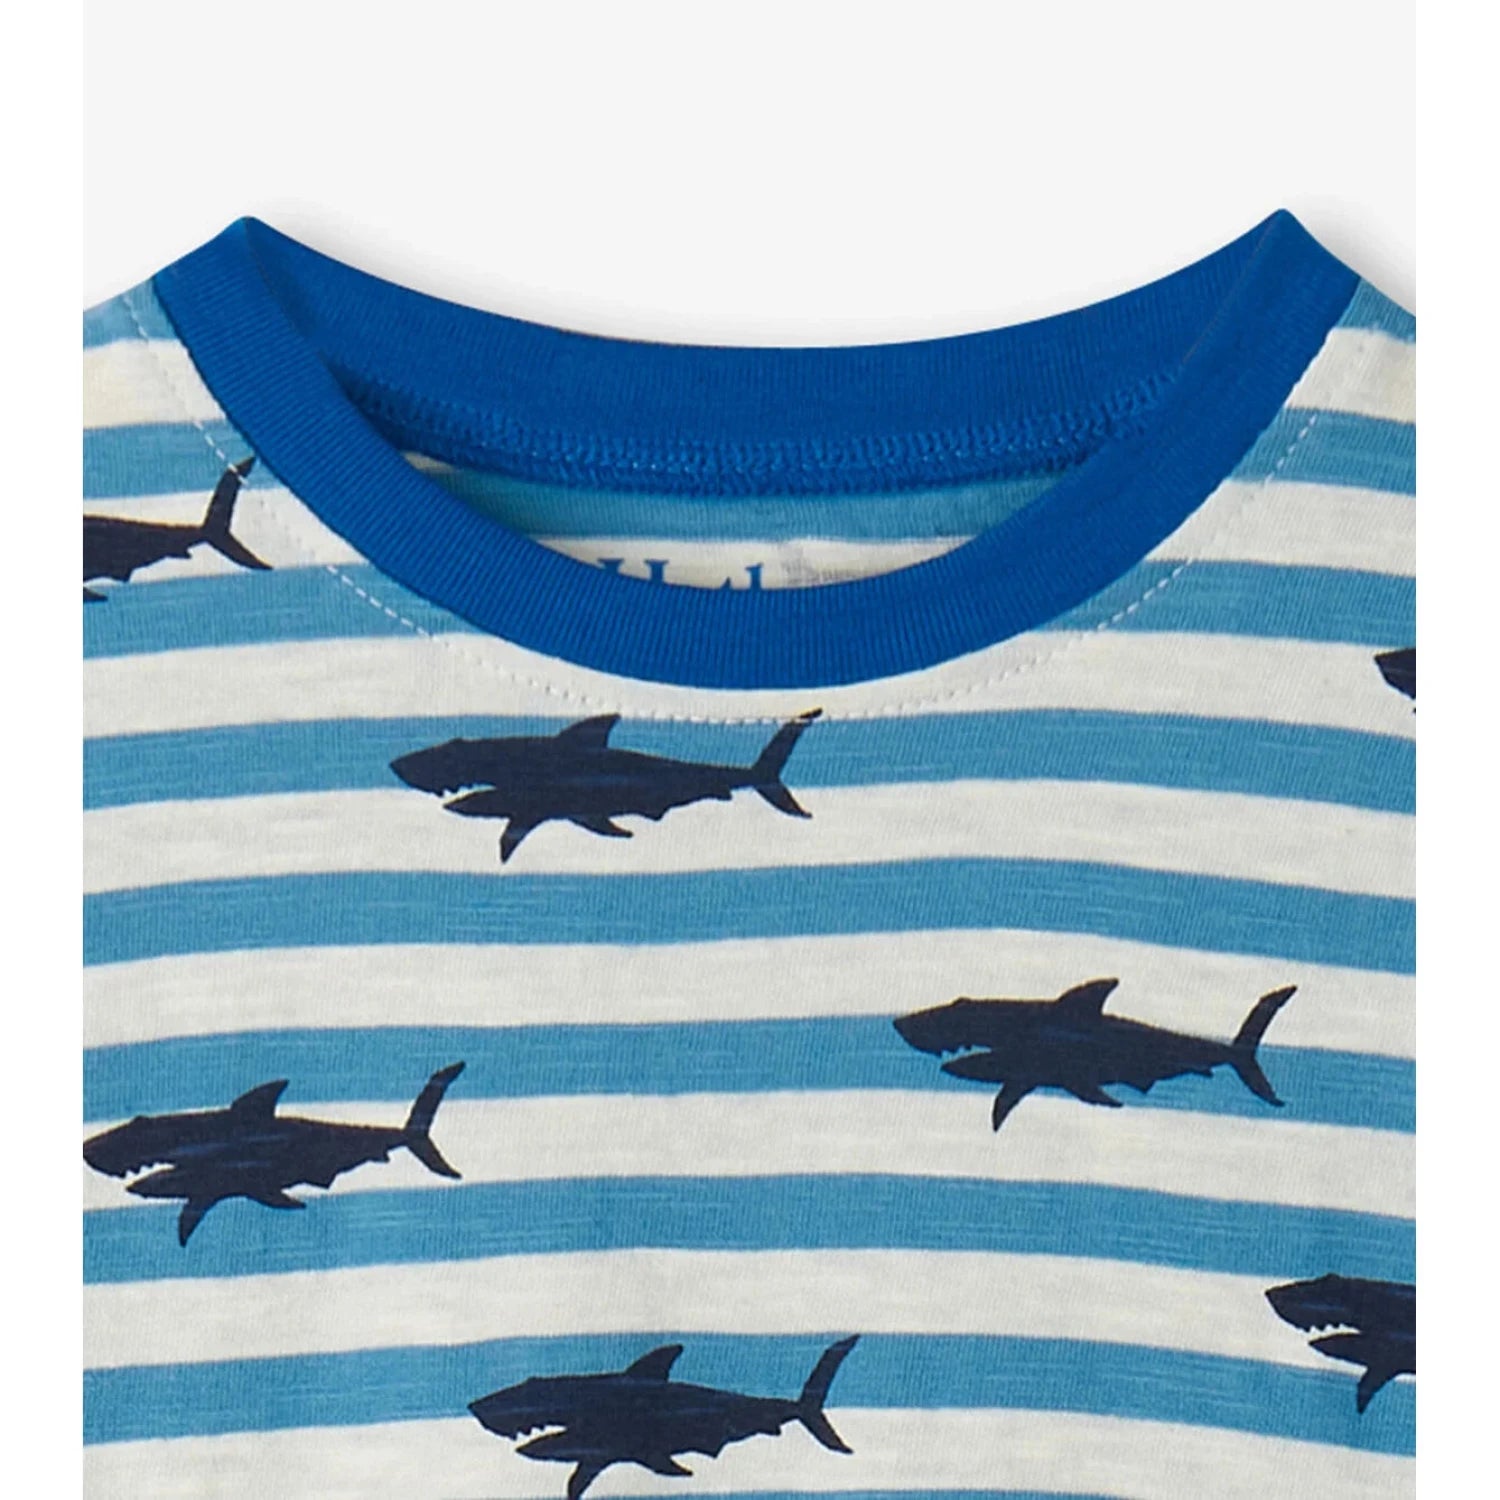 Hatley Baby & Toddler Boys Slouchy Tee shown in the Shark Stripes option. Collar view.